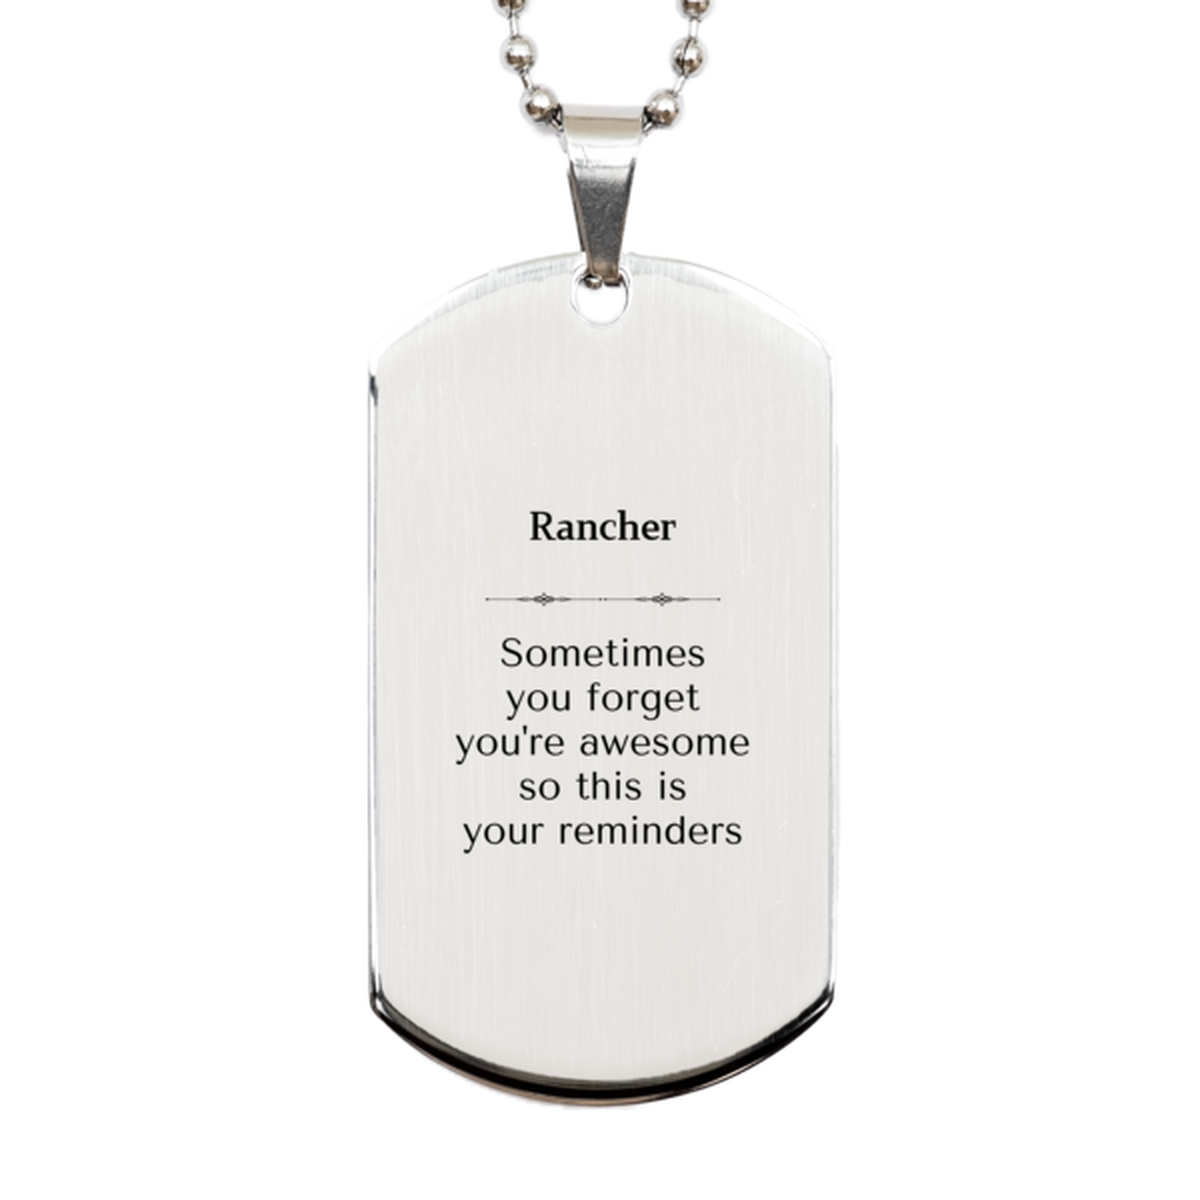 Sentimental Rancher Silver Dog Tag, Rancher Sometimes you forget you're awesome so this is your reminders, Graduation Christmas Birthday Gifts for Rancher, Men, Women, Coworkers